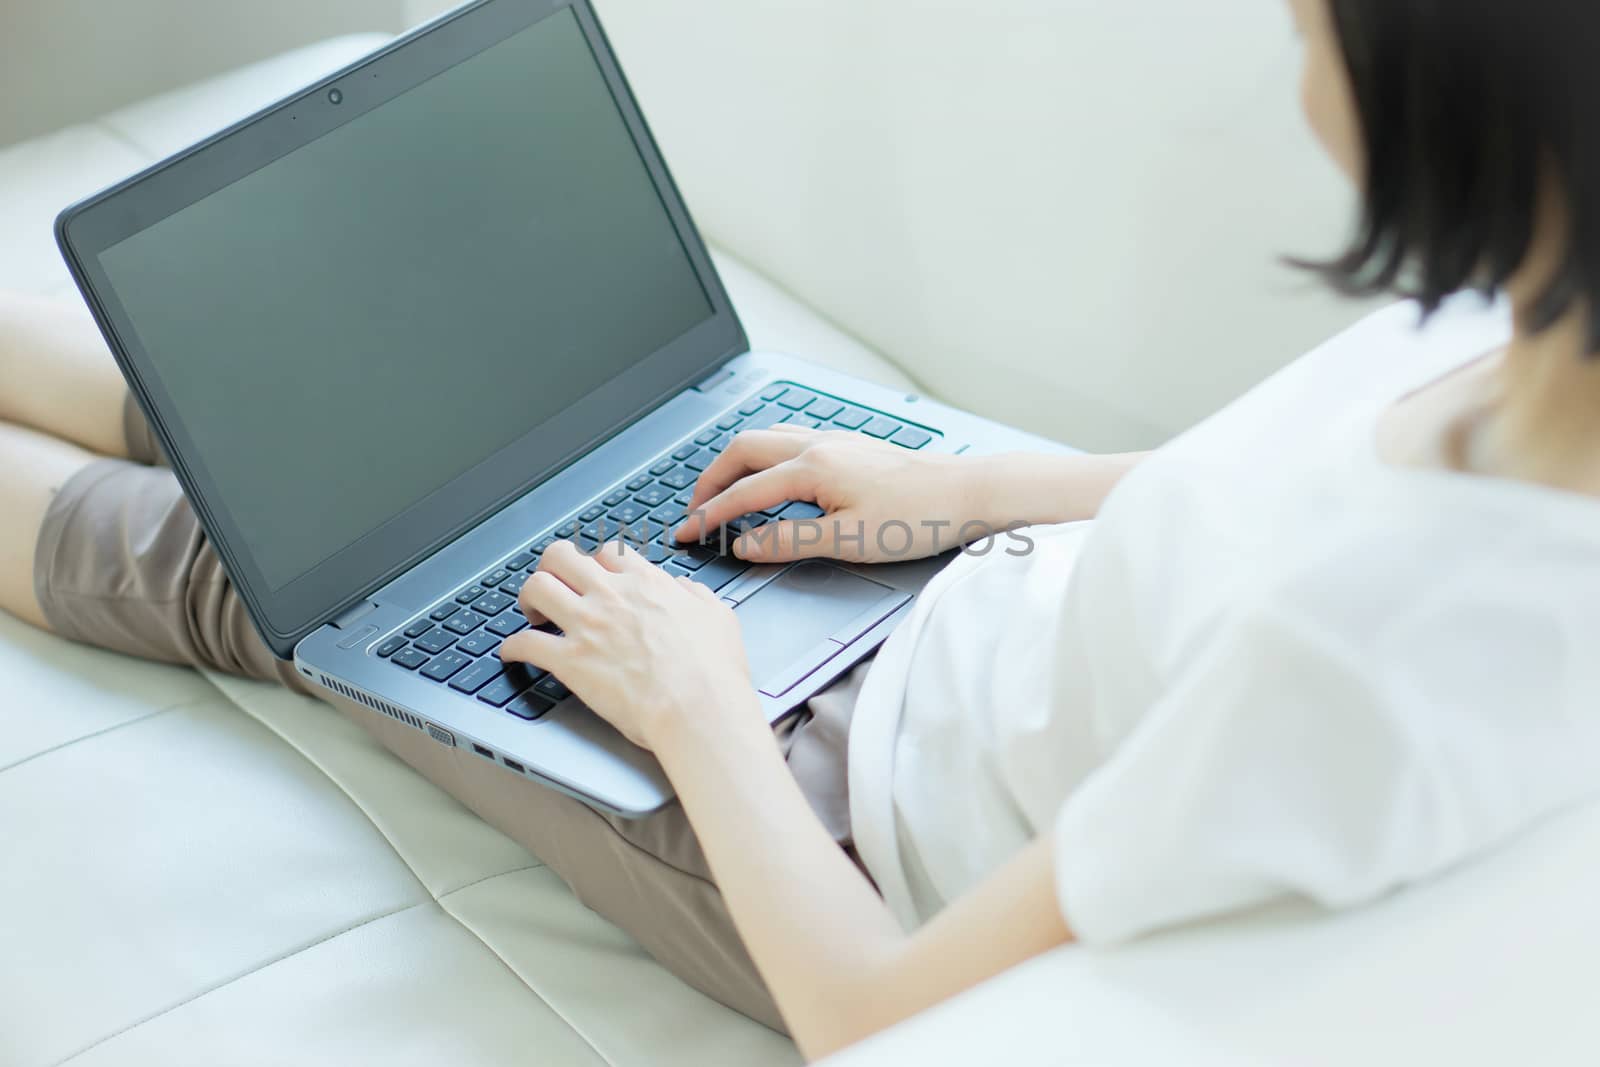 Casual young woman using laptop in living room at home